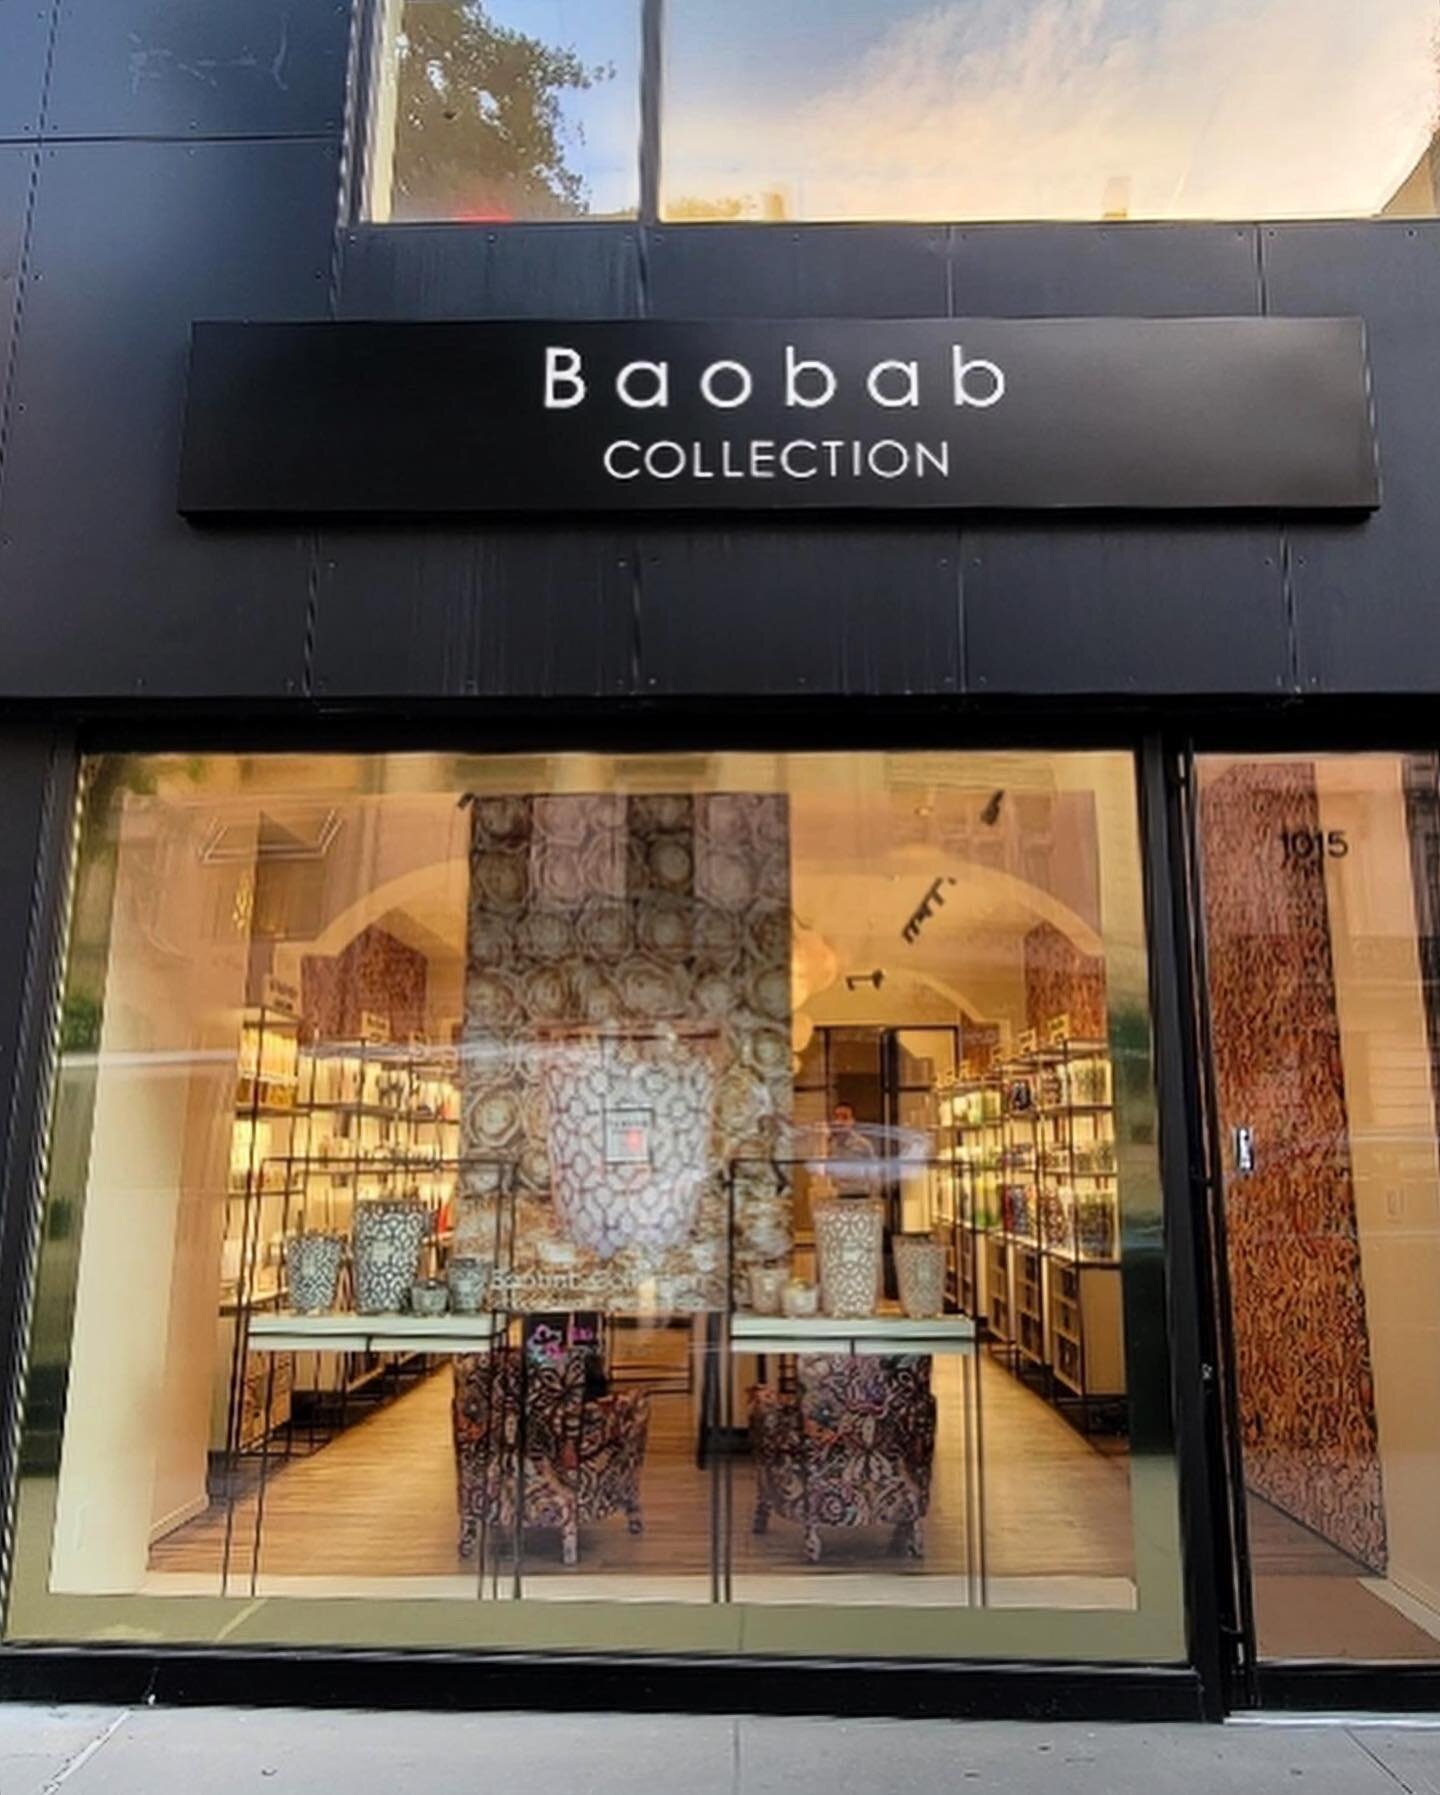 Check out the Baobab Collection storefront built by M&amp;J!